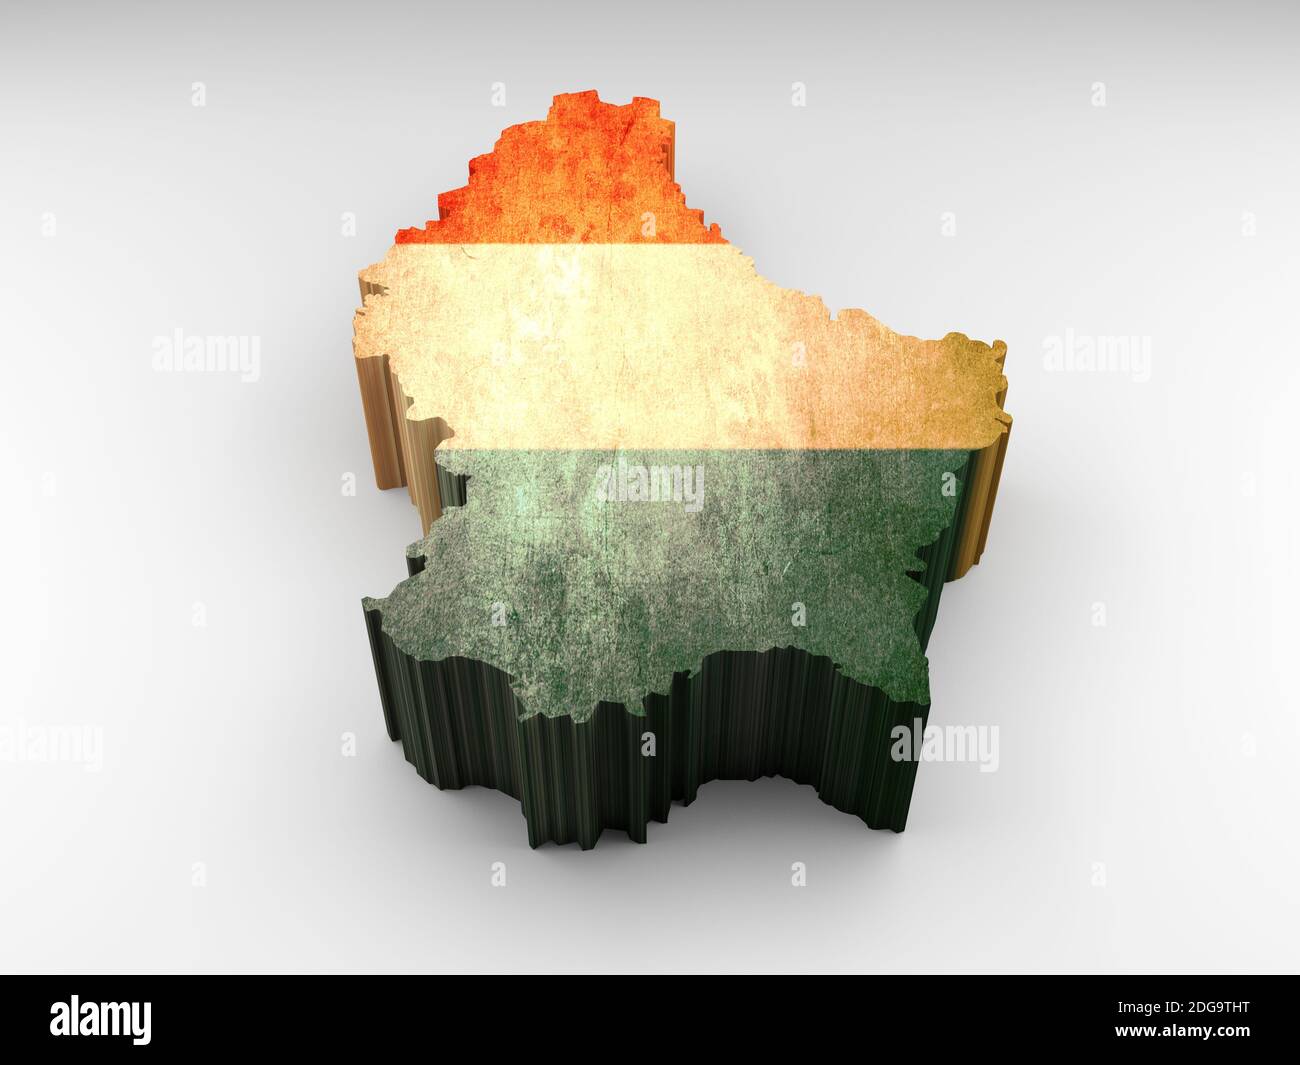 Luxembourg 3d map textured with a Luxembourgish flag Stock Photo